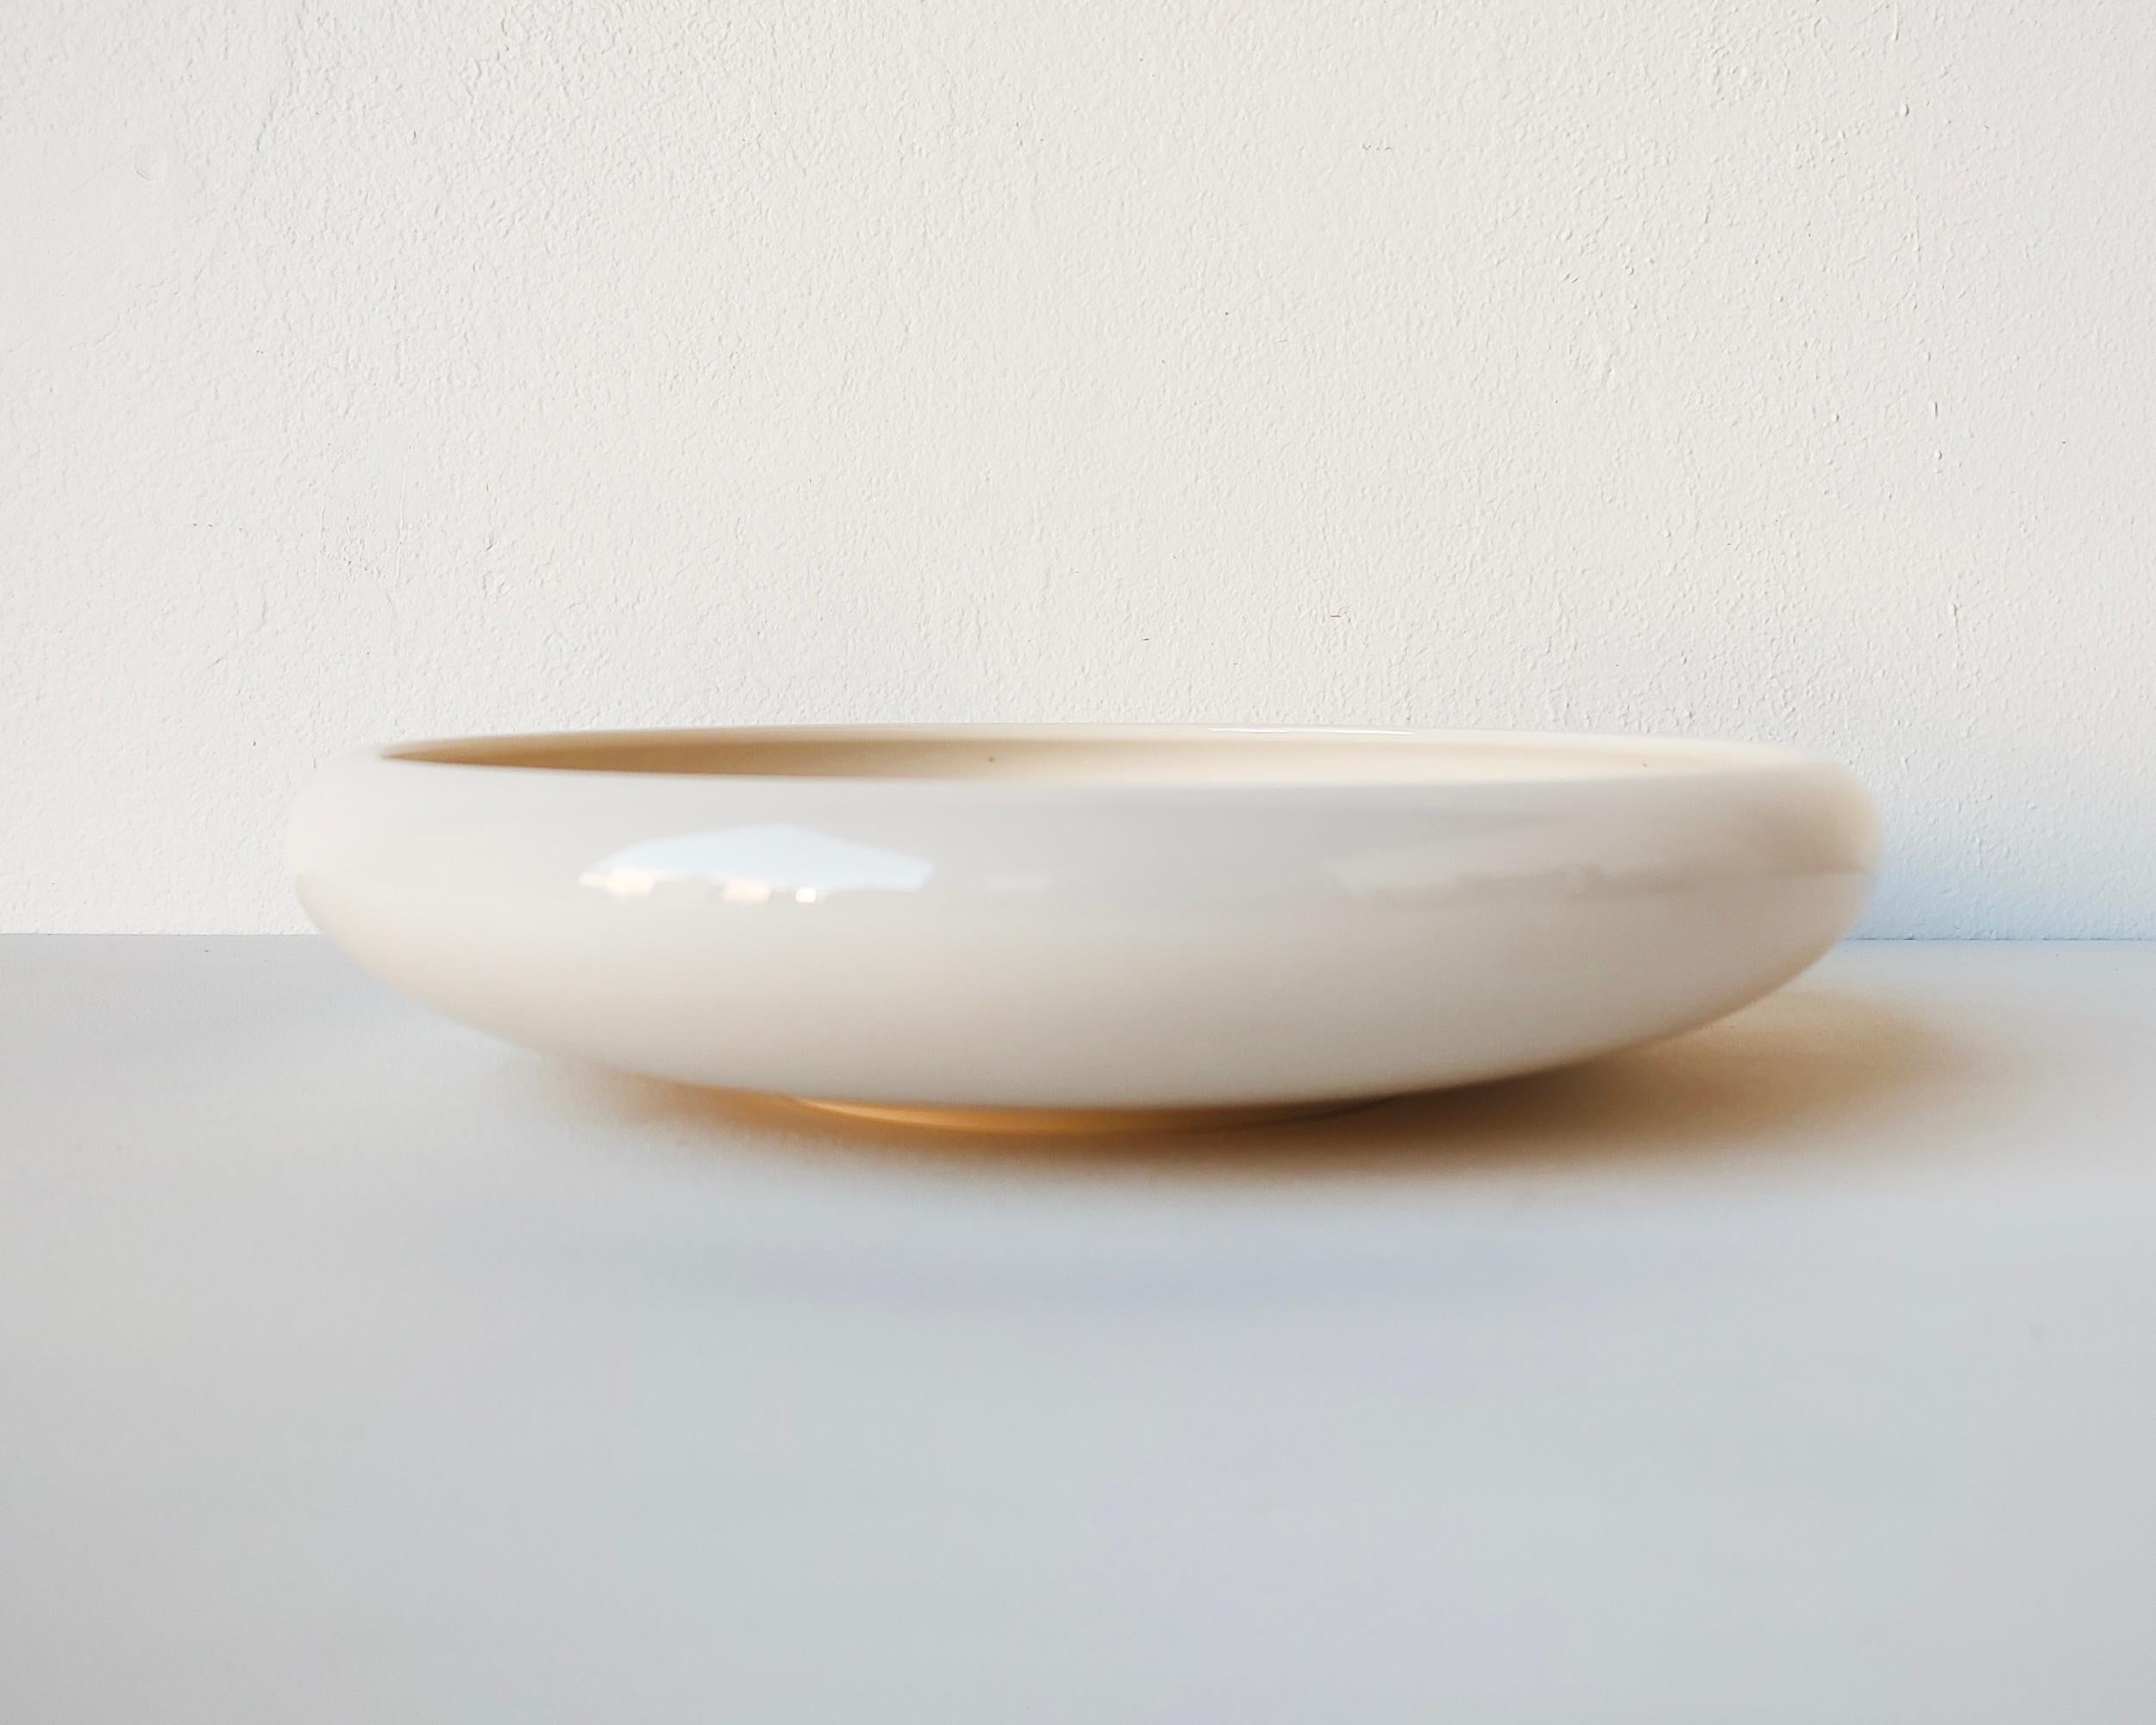 Large shallow ivory porcelain bowl by Lenox circa 1930s. Beautiful curvature and minimal design. Excellent condition, no chips or cracks.

Approx 11